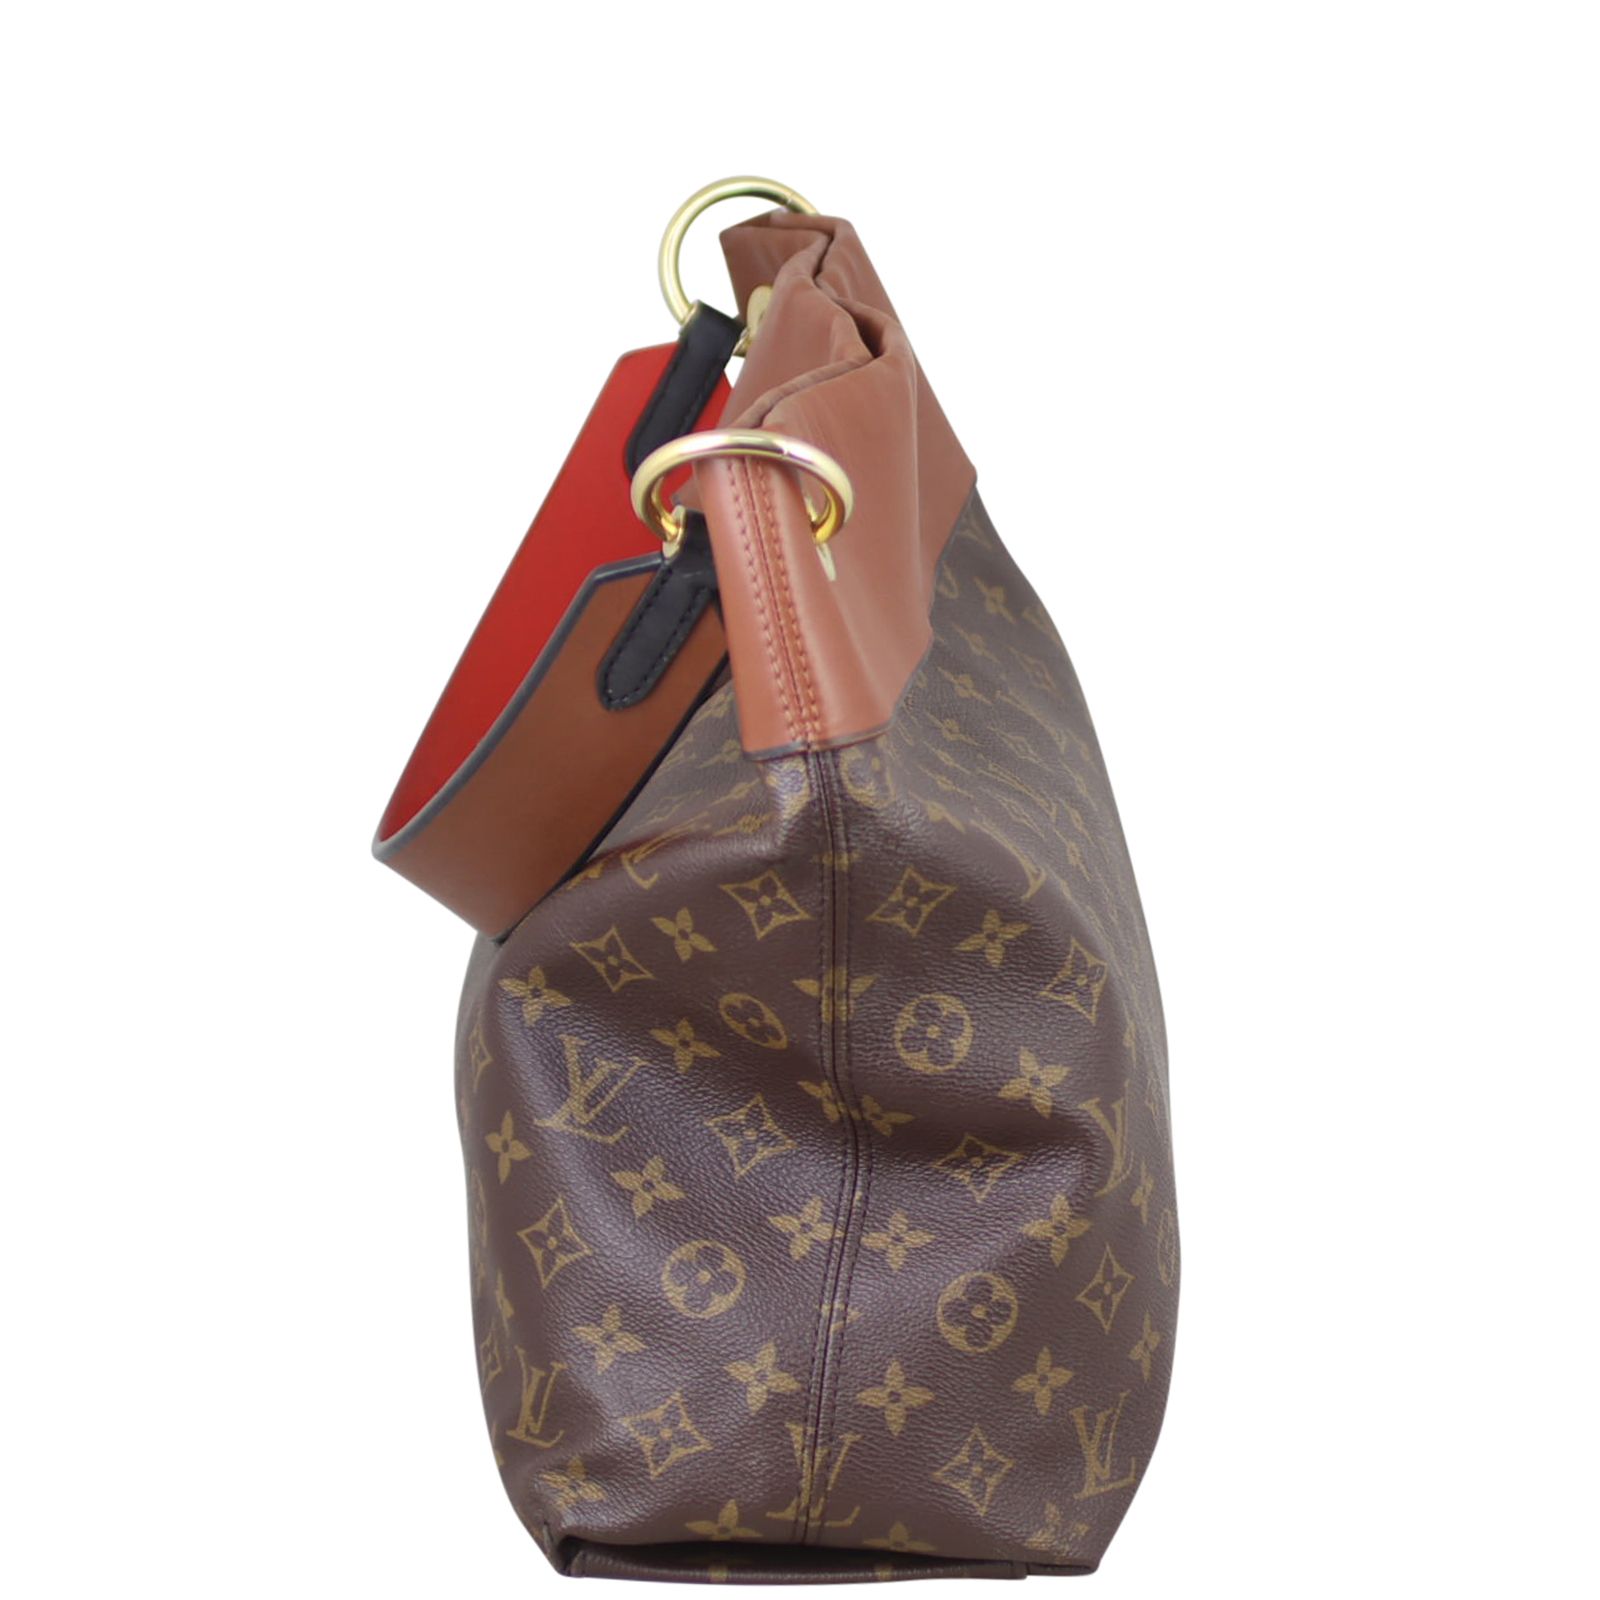 Gorgeous Authentic Louis Vuitton Tuileries Besace Carmel Red Hobo